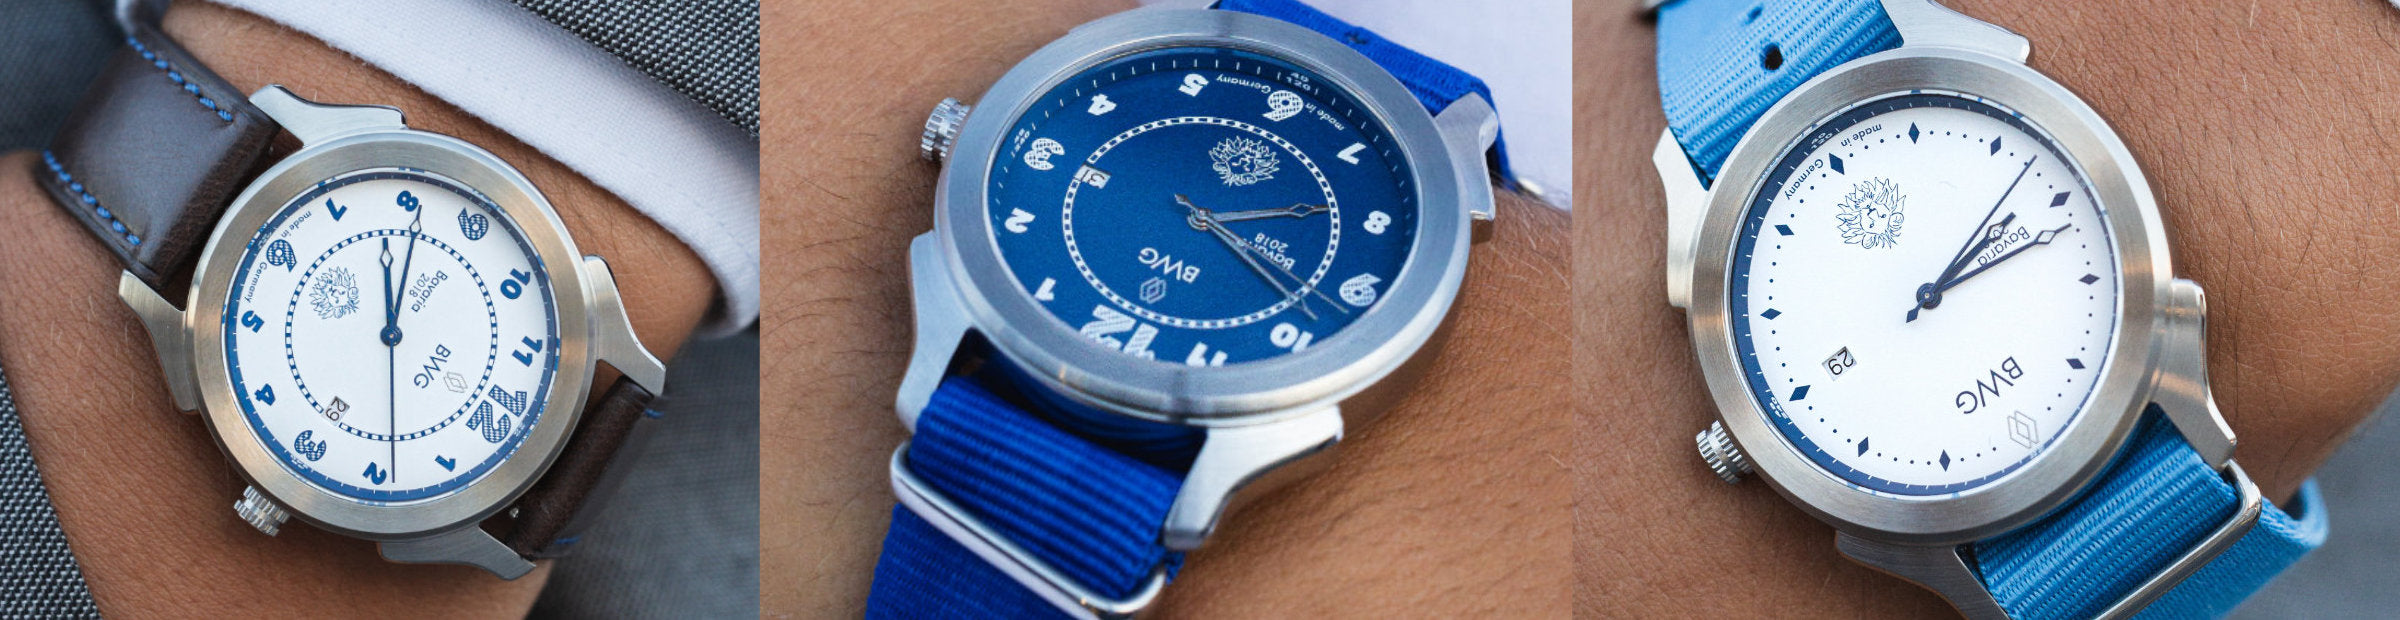 Title of the BWG Bavarian Watch Collection of Metal Milanese Mesh straps, textile Nato straps and Leather Bund straps